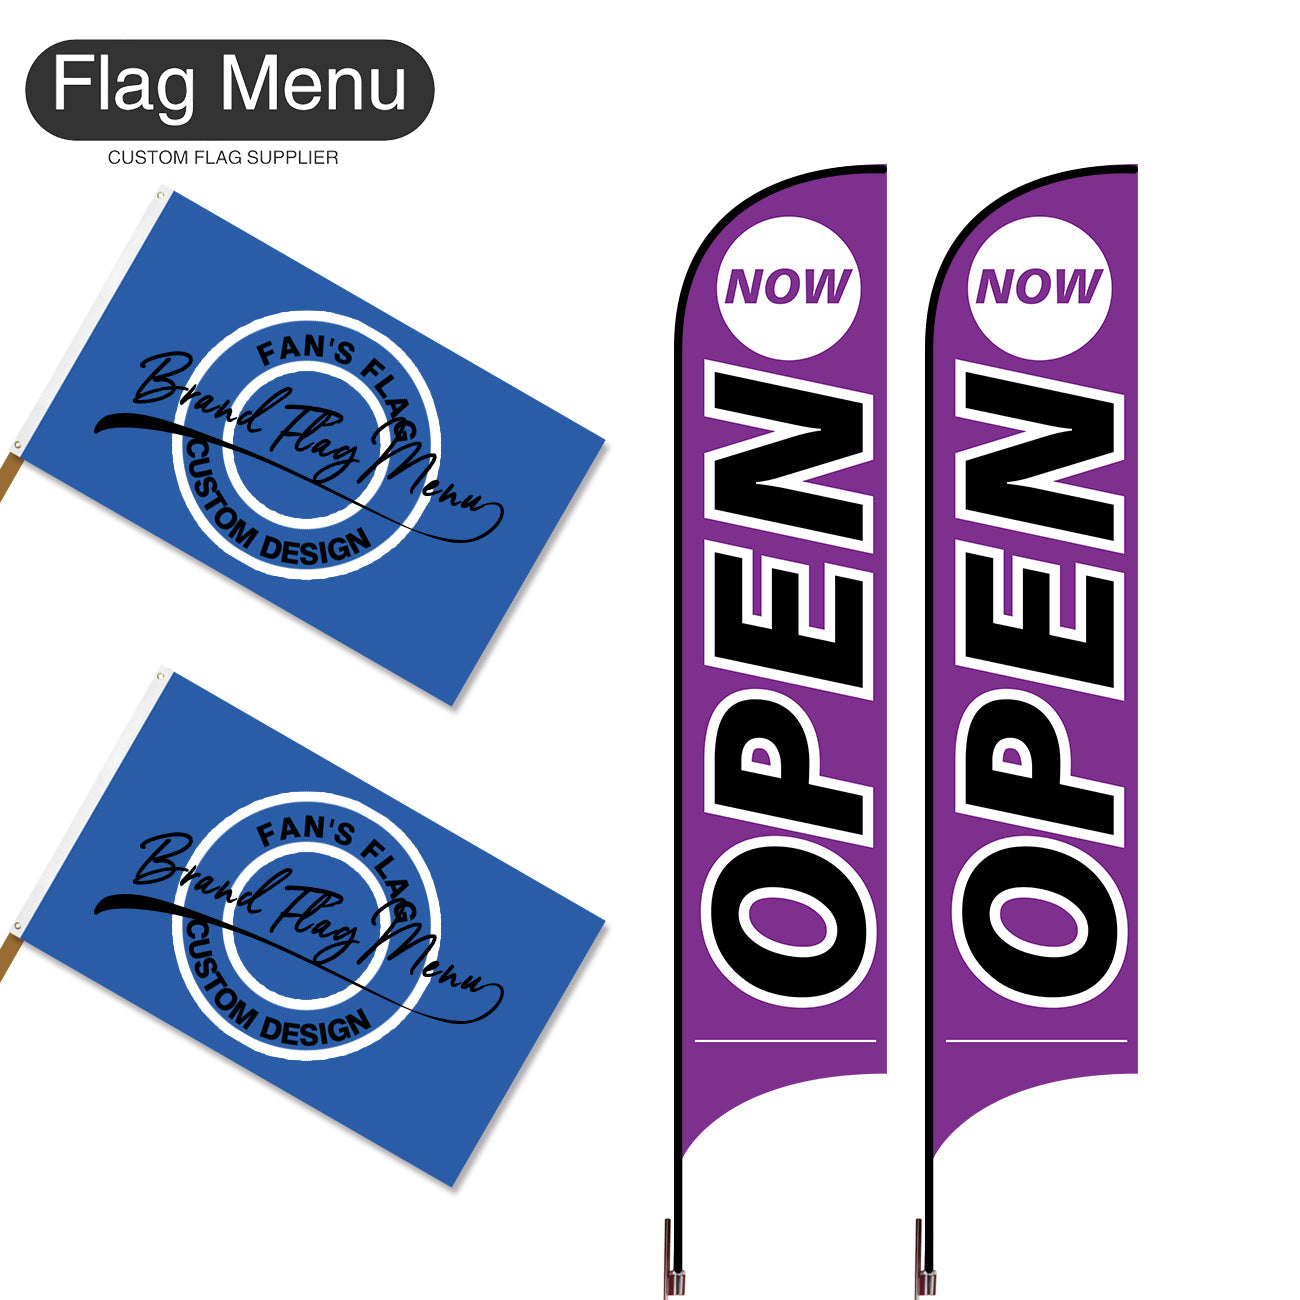 Outdoor Advertising Set - B-Purple B-S - Feather Flag -Double Sided & 3'x5' Regular Flag -Single Sided-Cross & Water Bag-Flag Menu